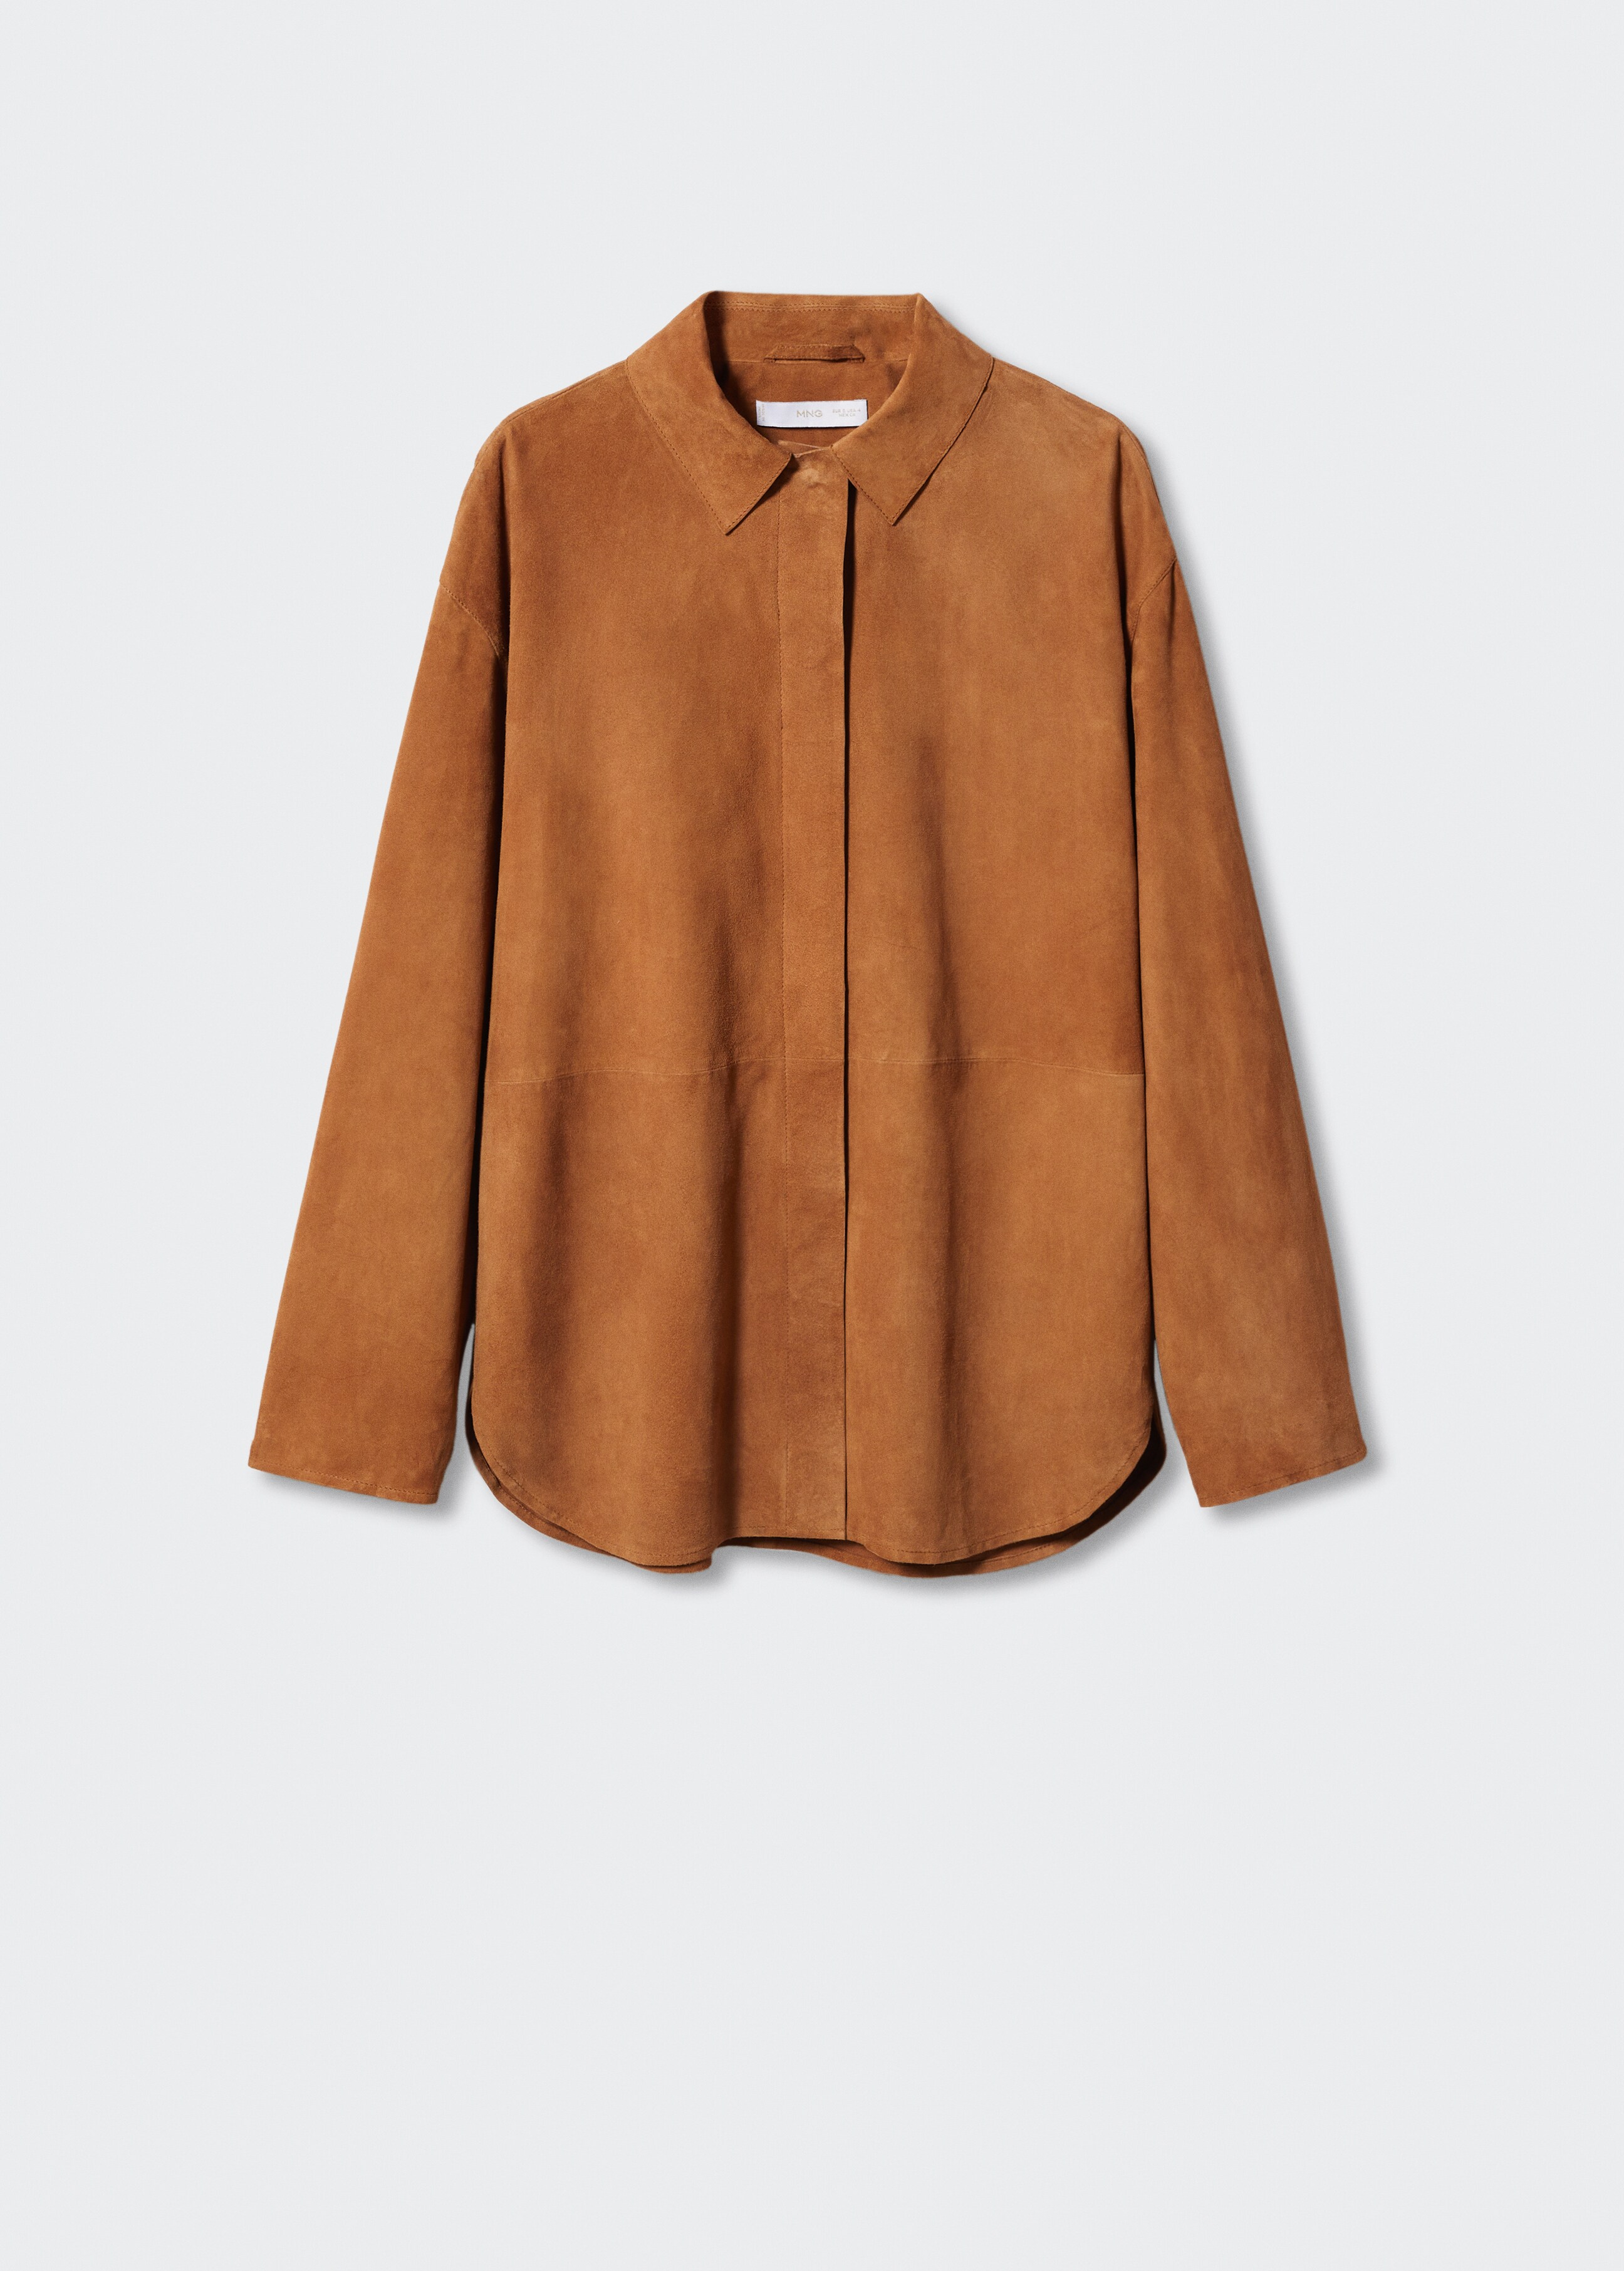 Suede leather shirt - Article without model